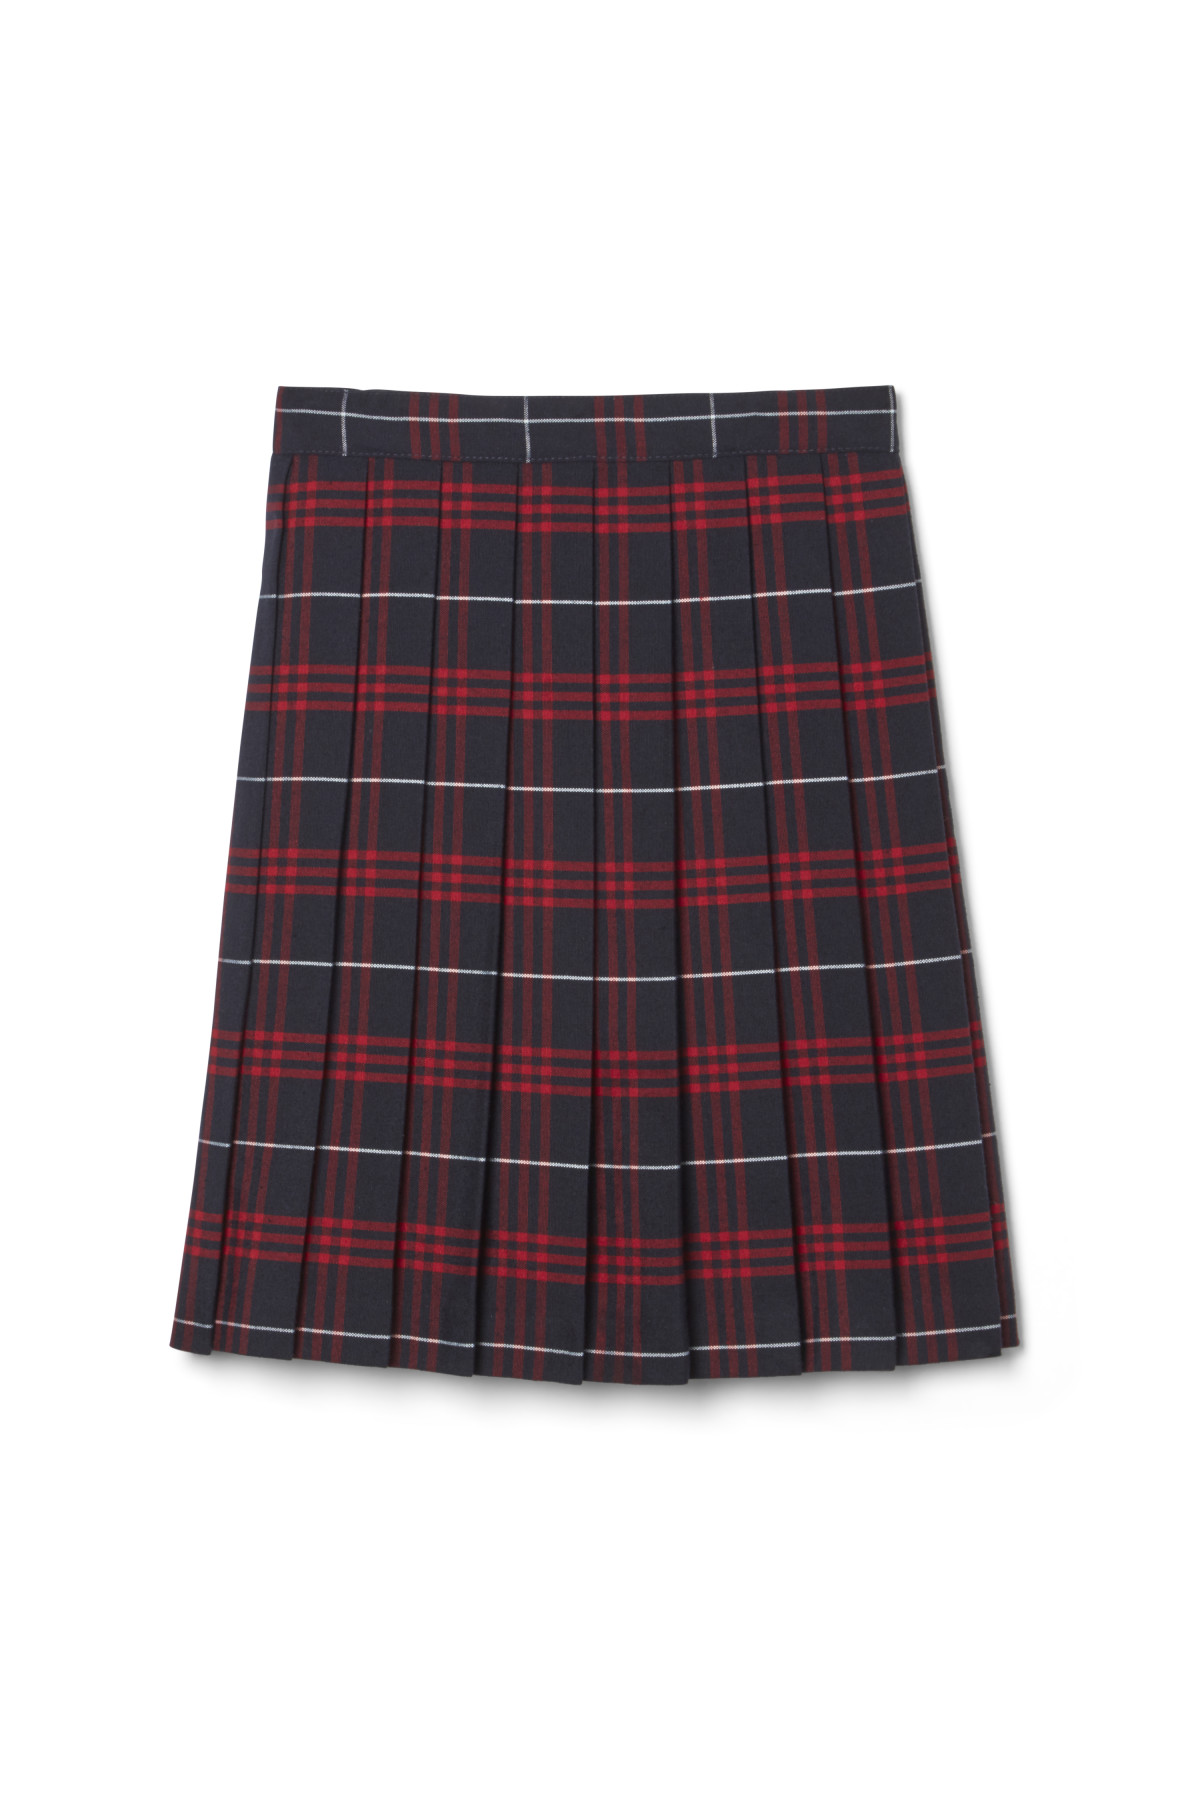 Girls Plaid Pleated Skirt - French Toast